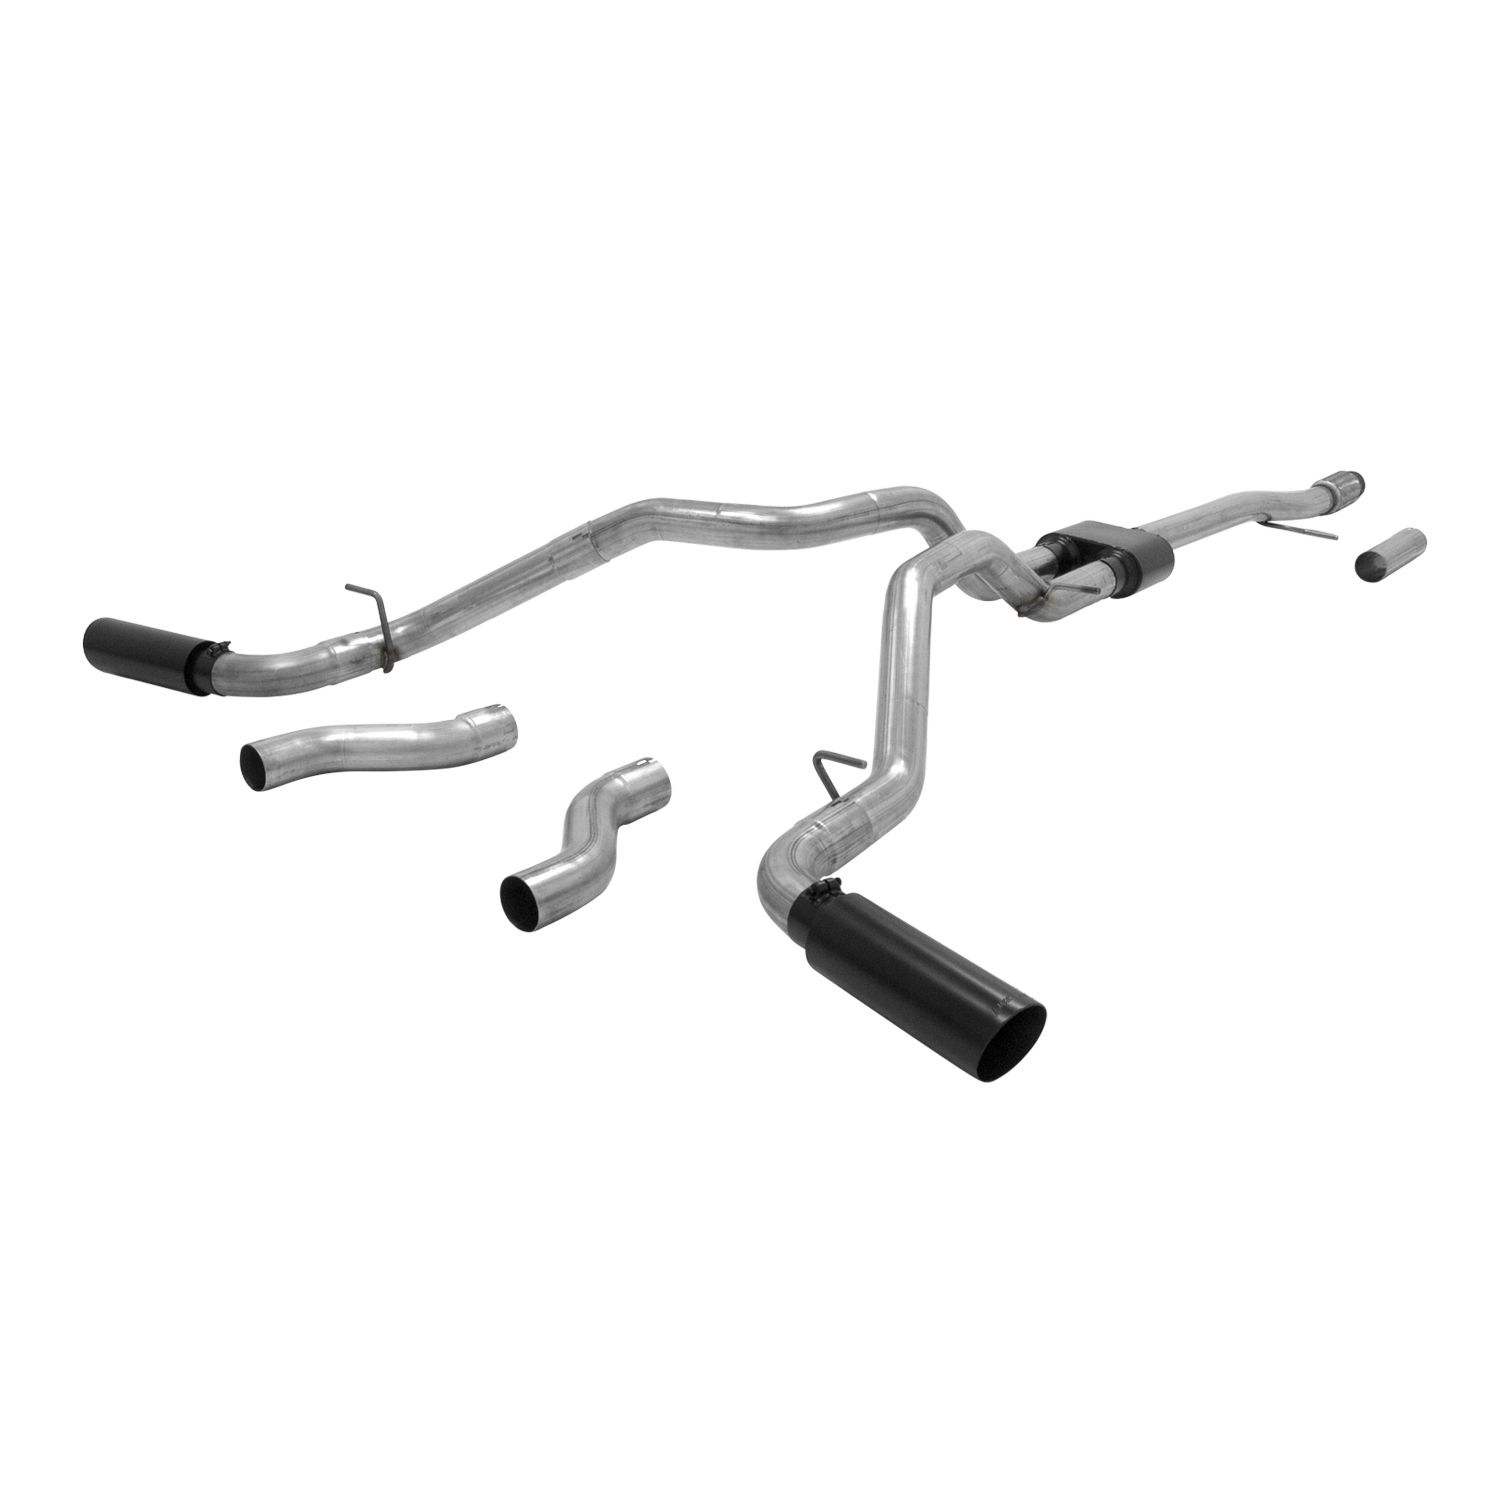 2014 Chevrolet Silverado 1500 5.3L Flowmaster Outlaw Cat-Back Exhaust - 817689